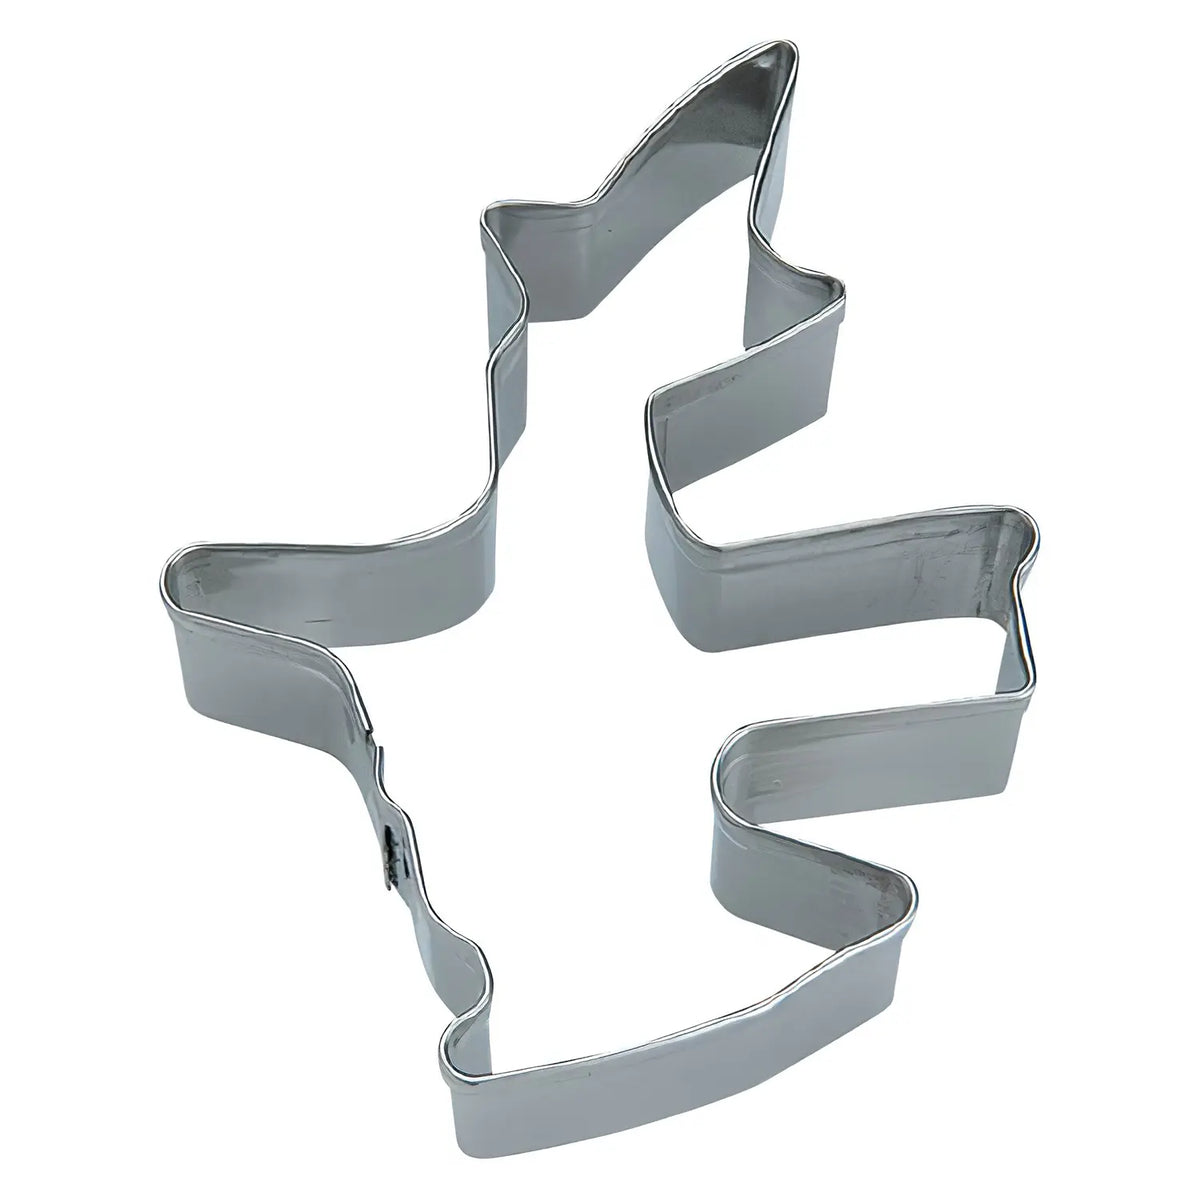 TIGERCROWN Cake Land Stainless Steel Cookie Cutter Witch